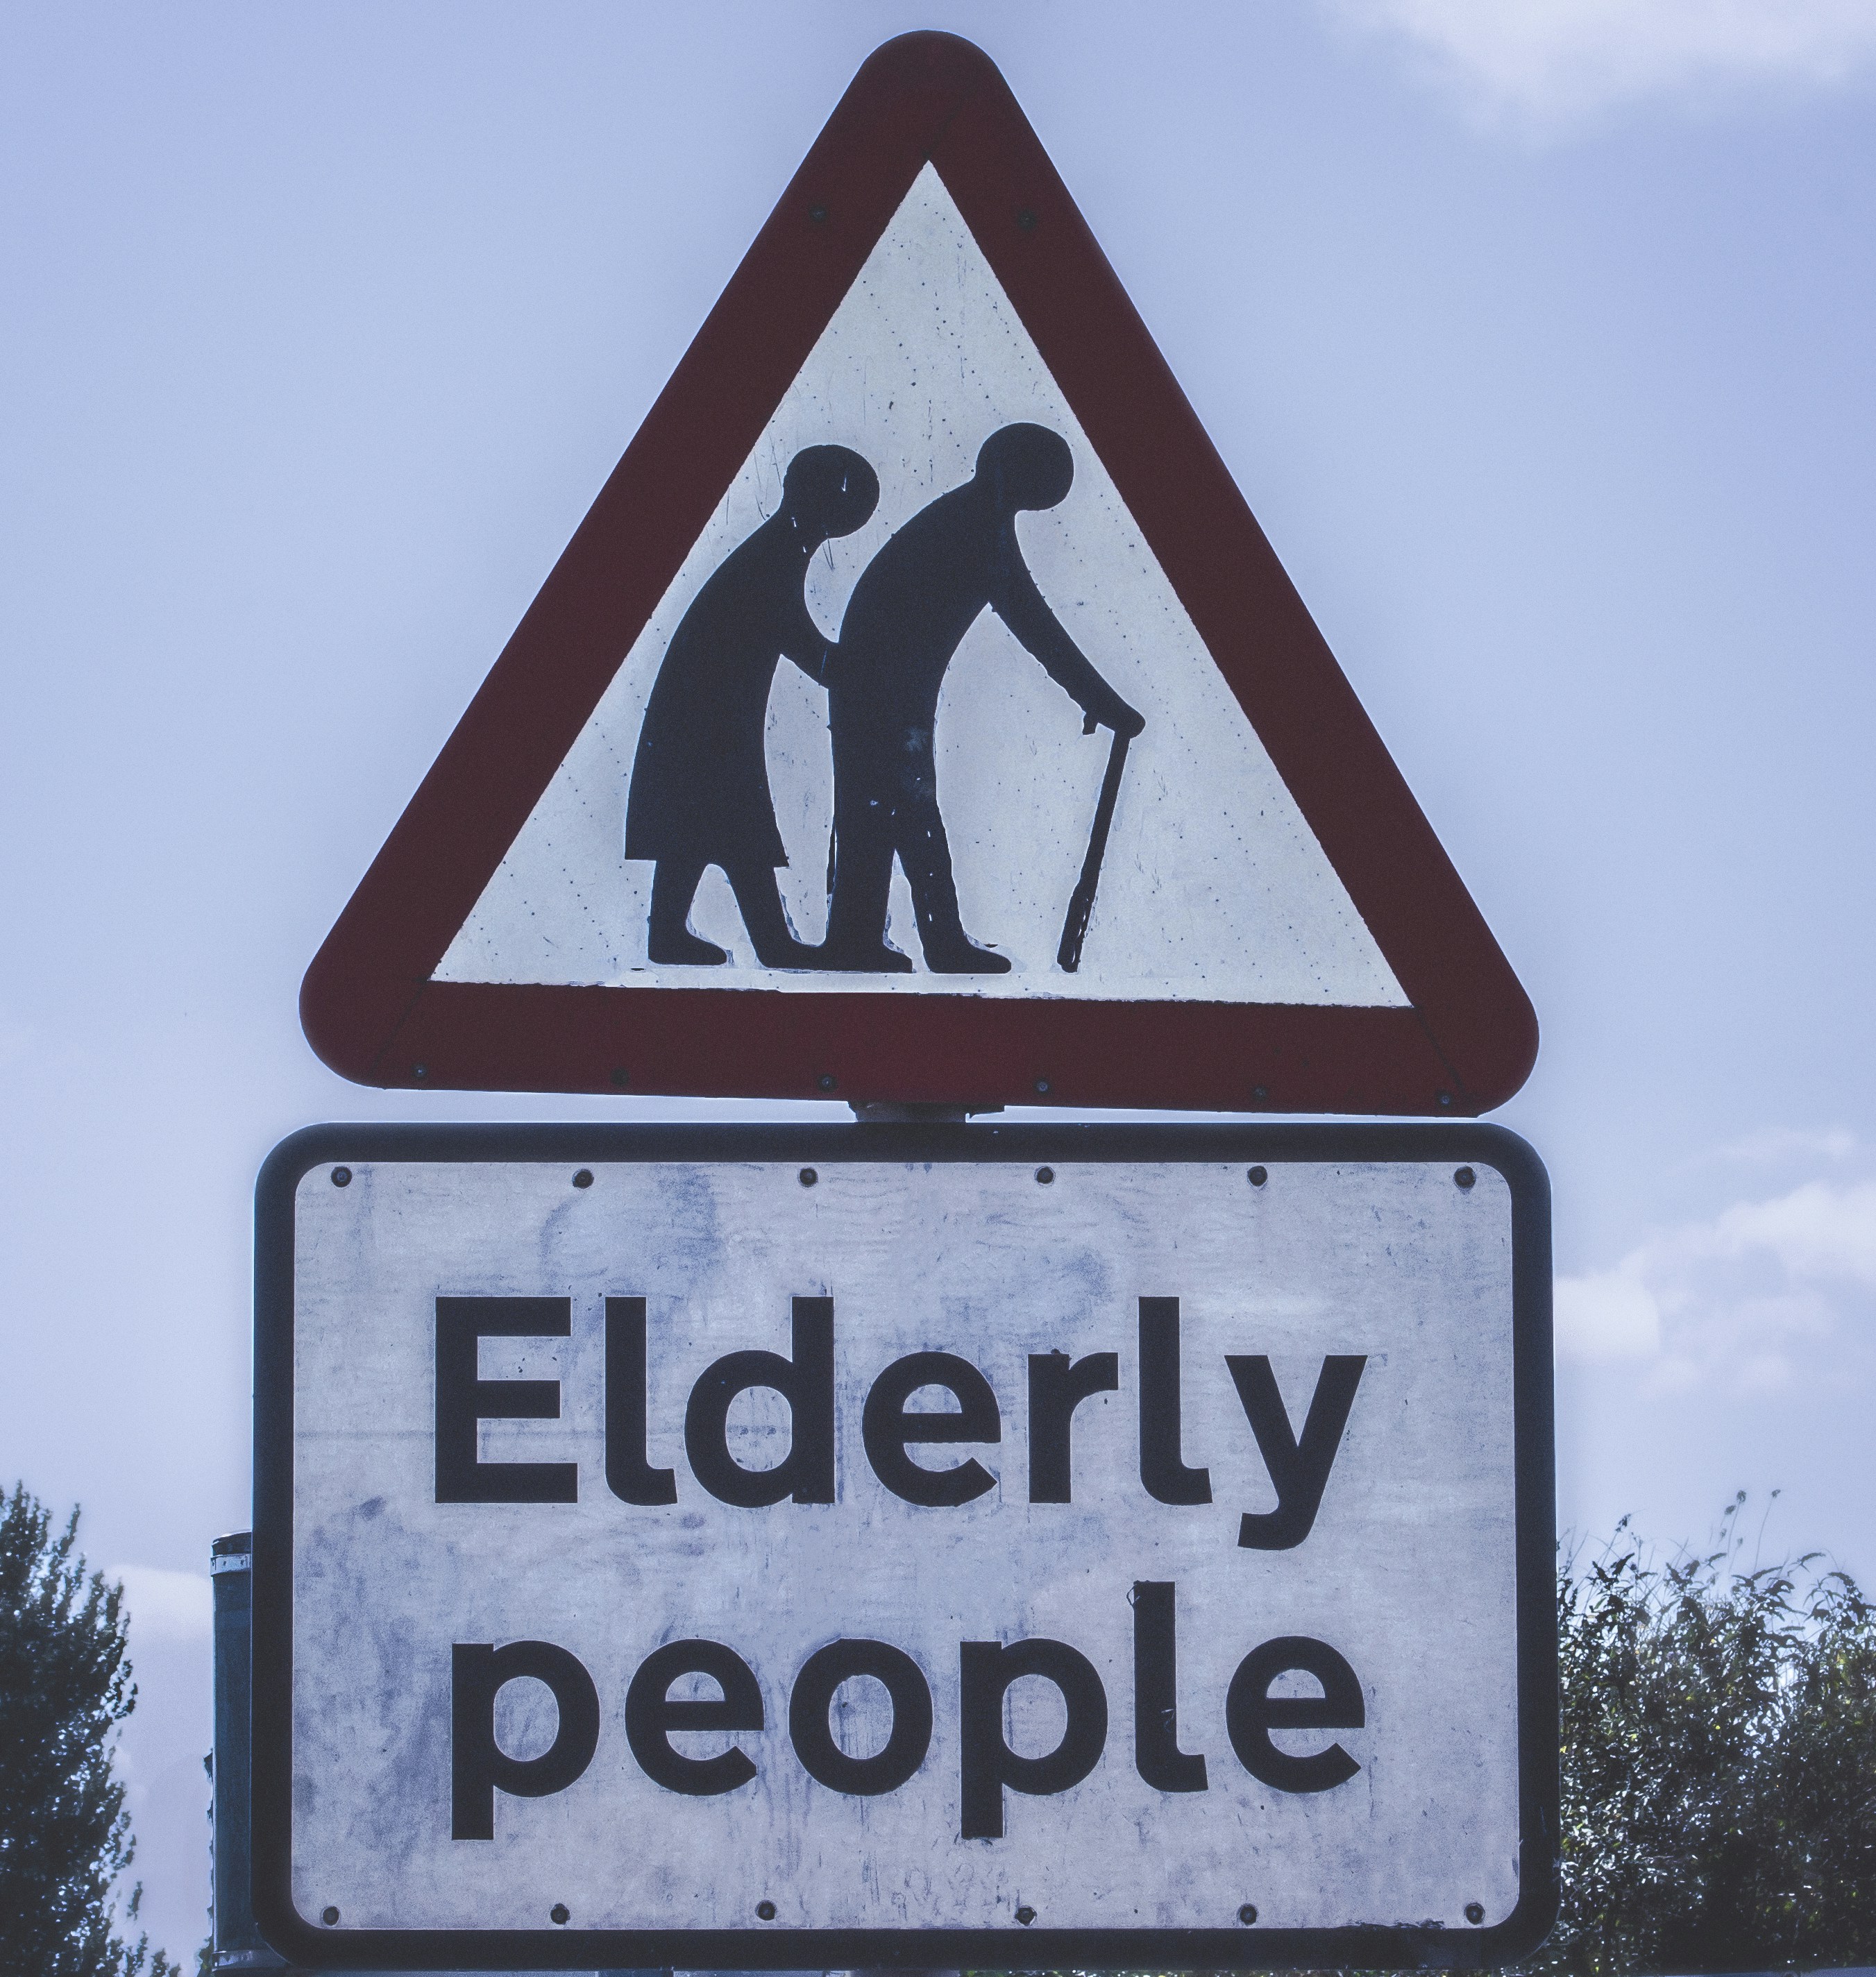 I have never understood why I am supposed to be afeared of elderly people.